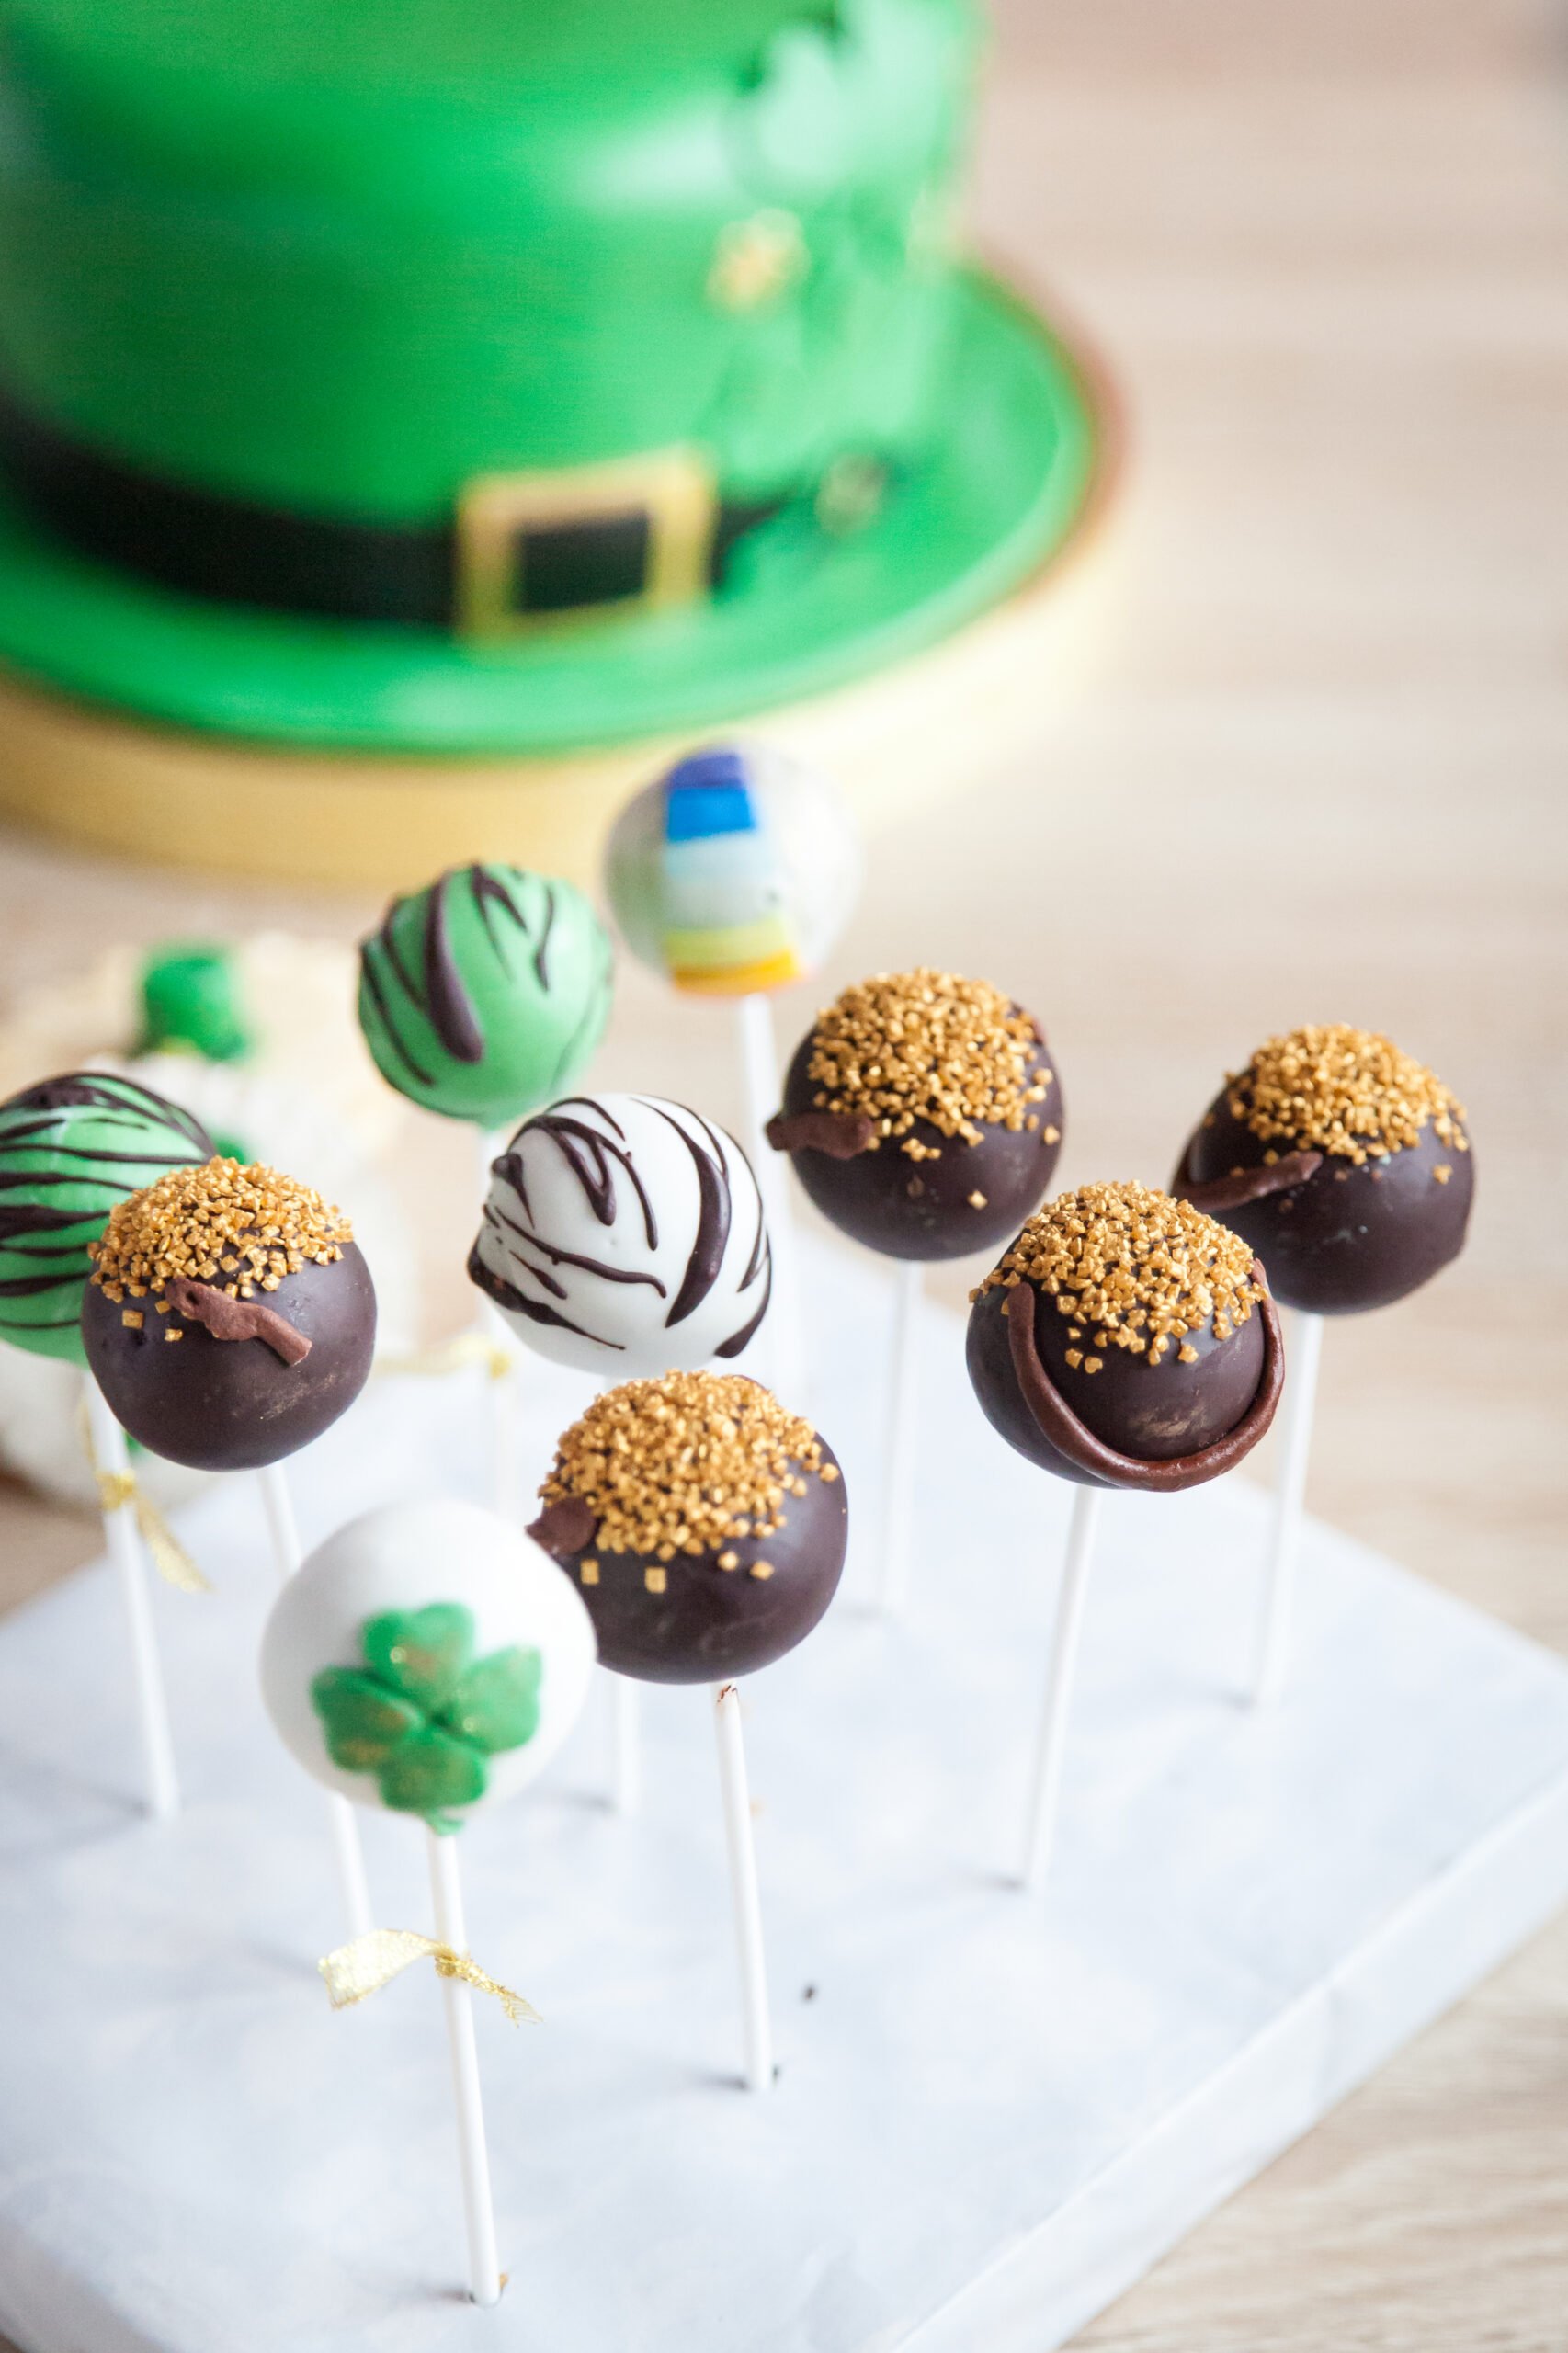 Funny cake pops for St Patrick's Day and green cake in the shape of a St. Patrick's hat in the background. First birthday party sweets - Top 10 St. Patrick's Day Dessert Recipes; St. Patrick's day recipes for desserts along with other green recipes for this Irish holiday!